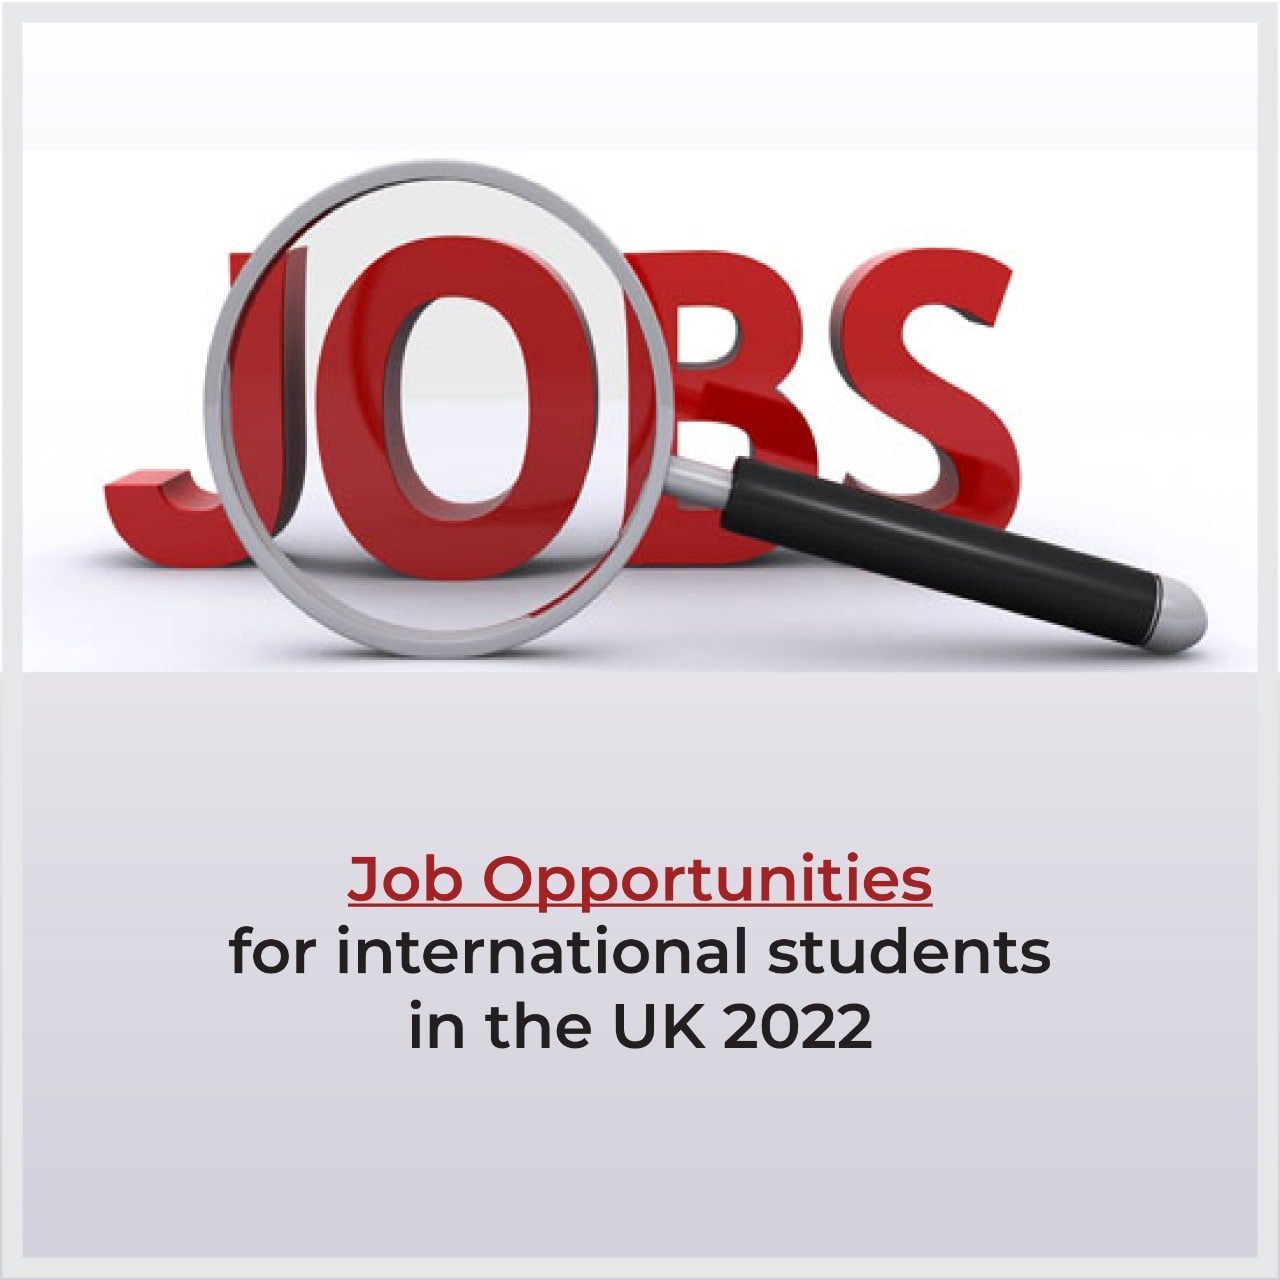 Job Opportunities for International Students in the UK 2022